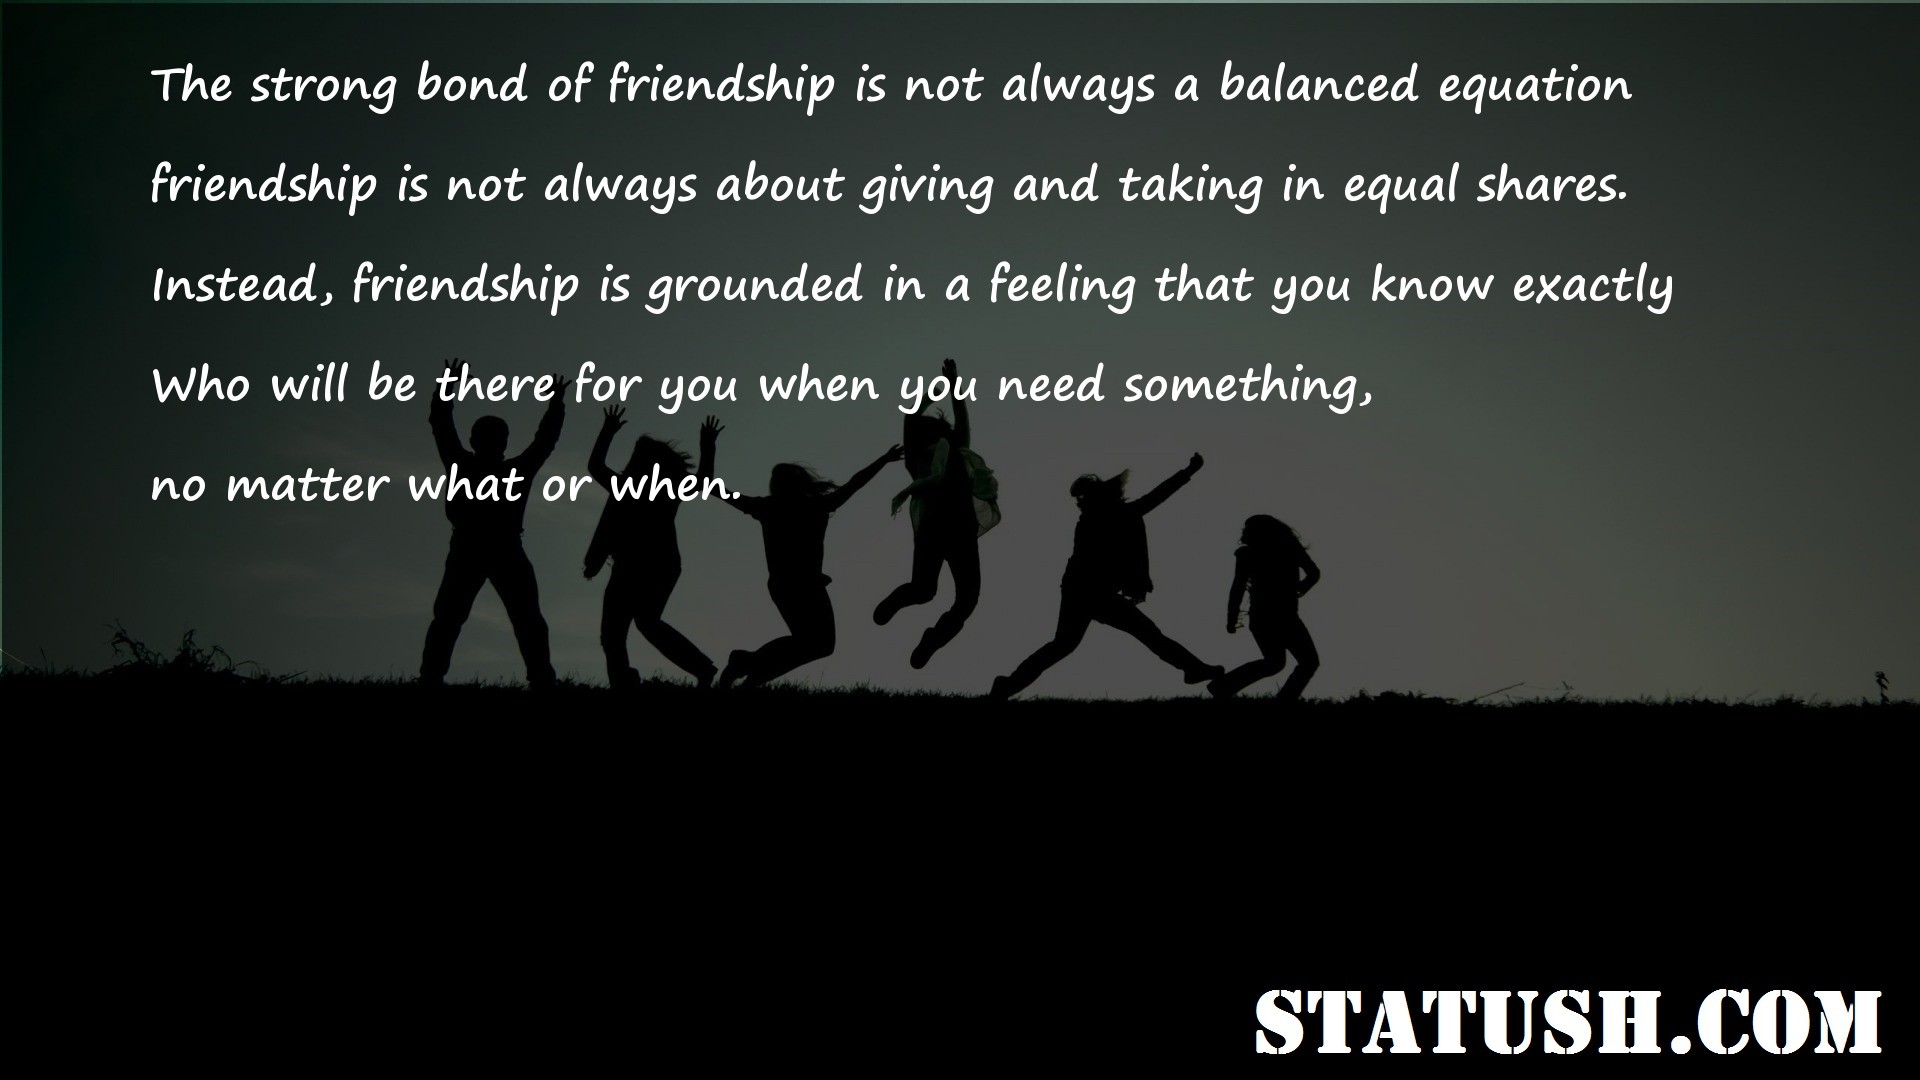 The strong bond of friendship is not always a balanced equation